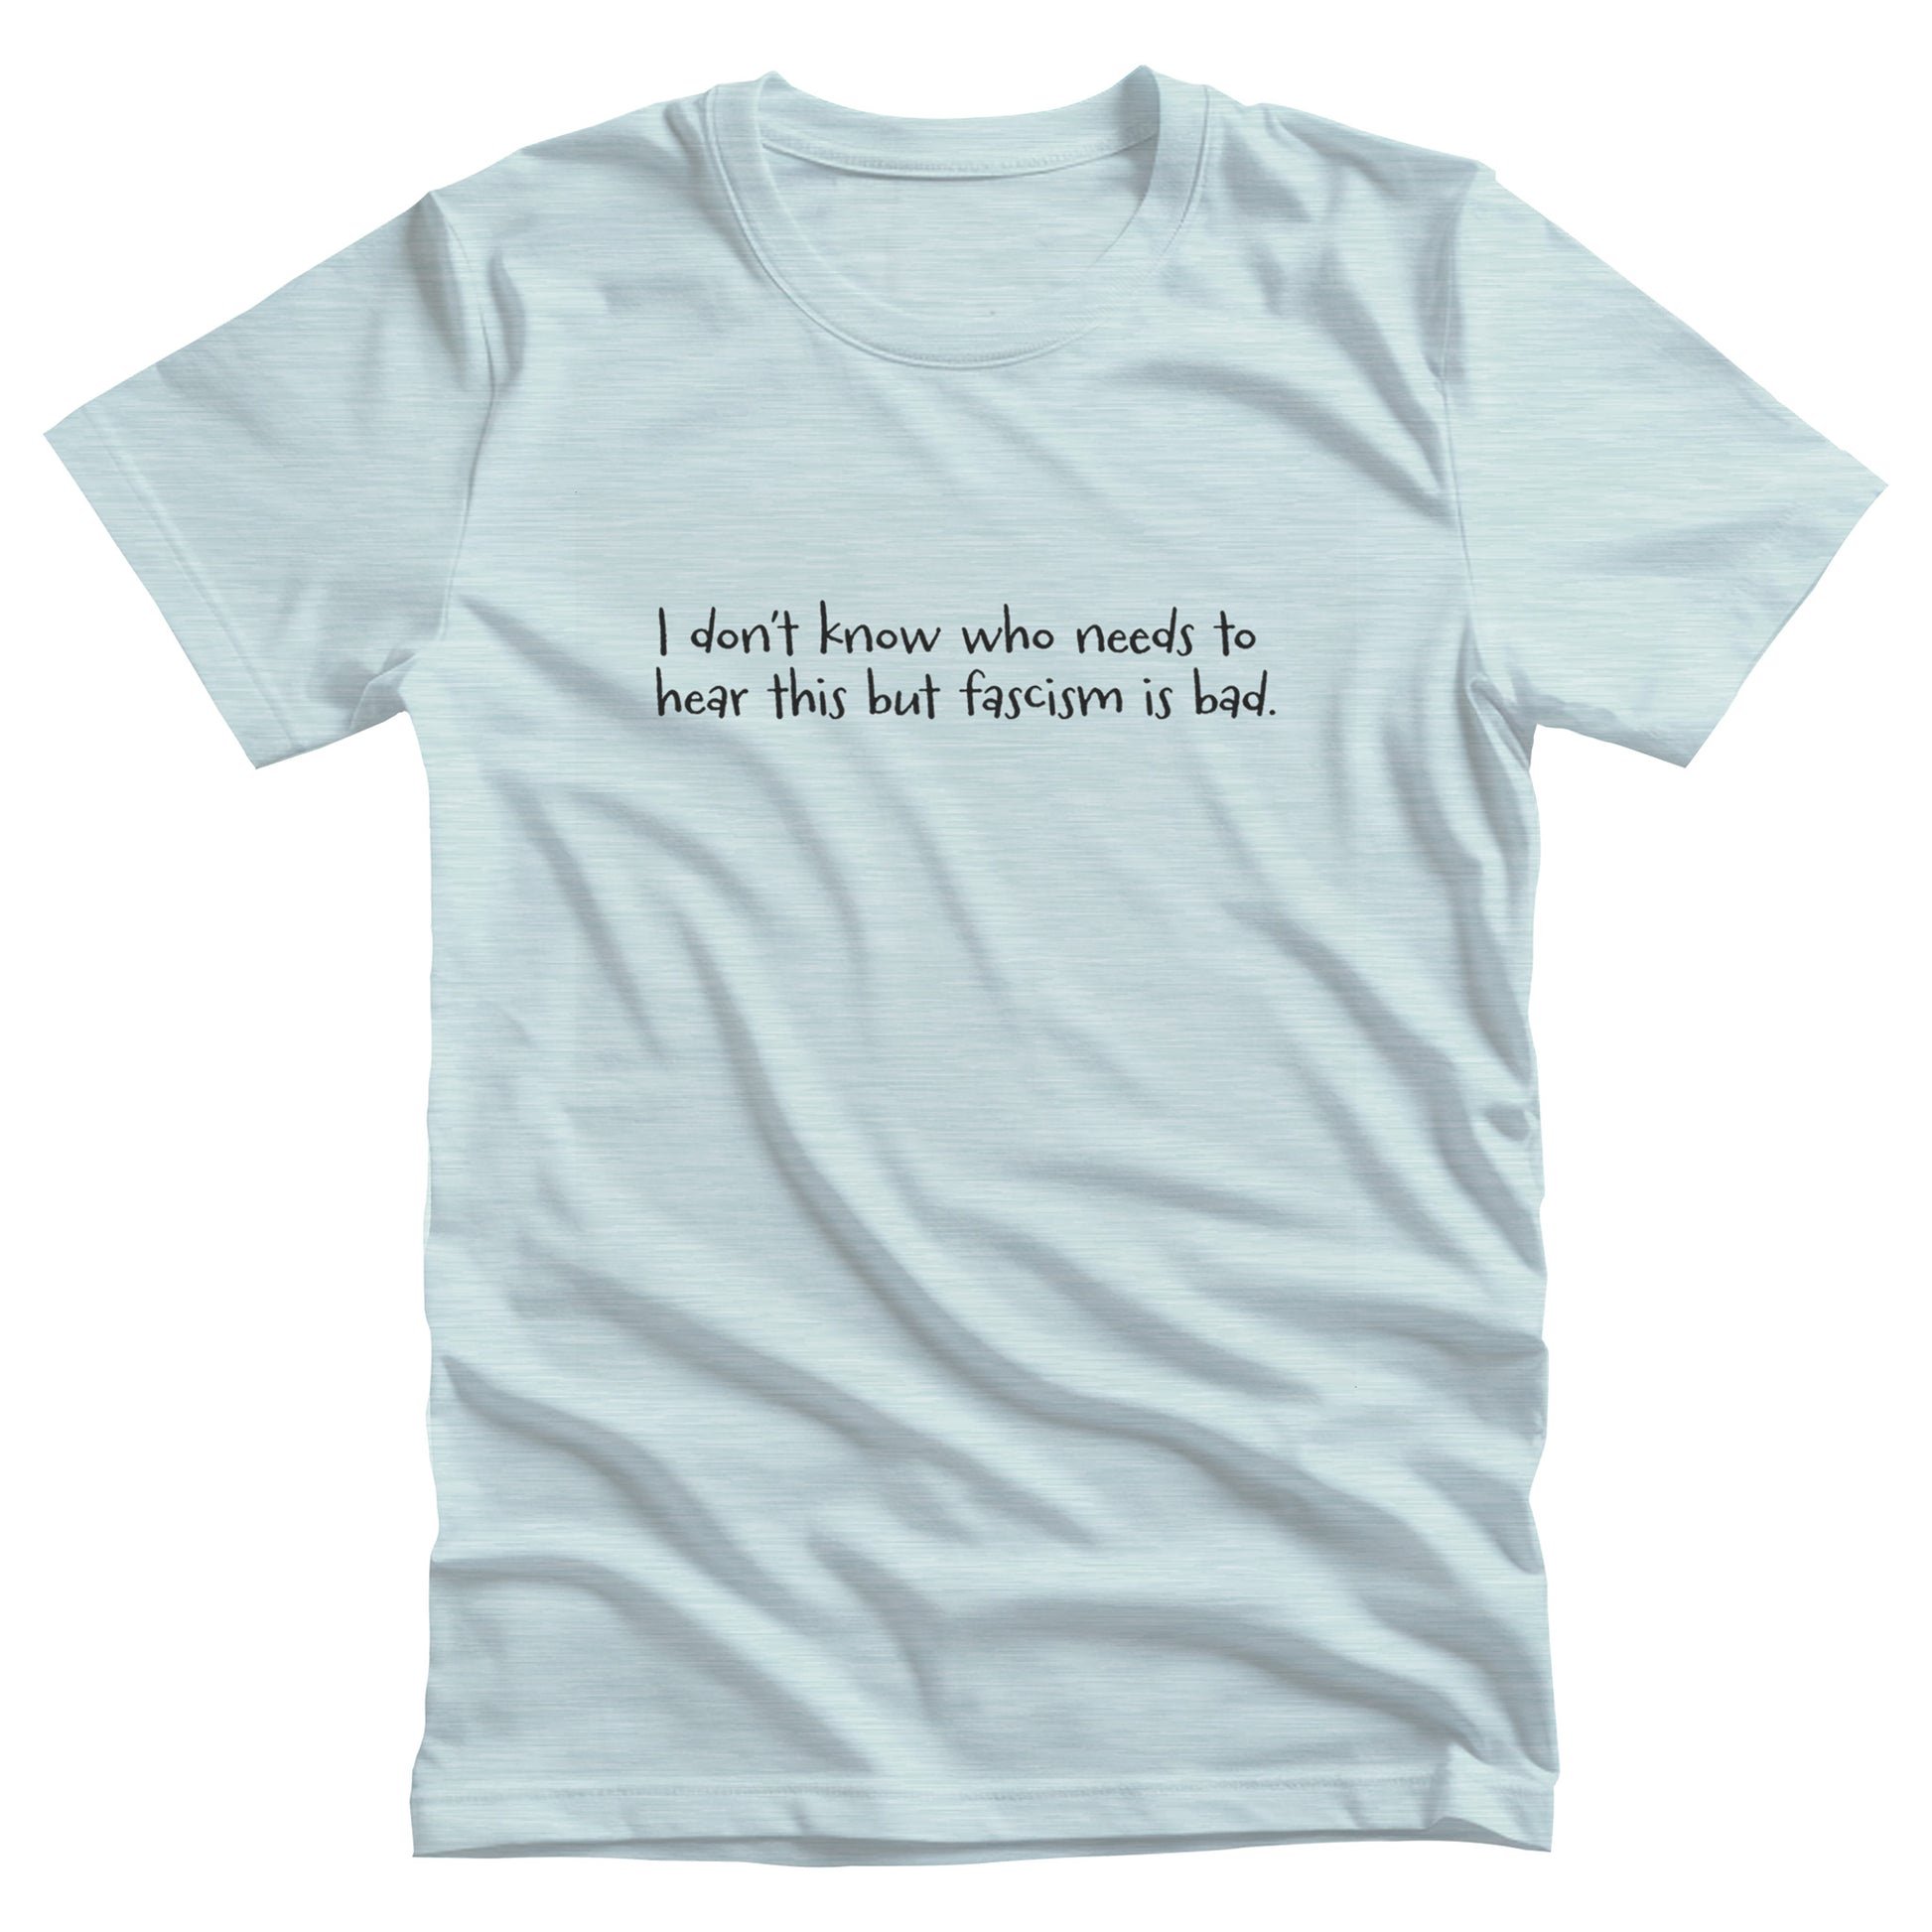 Heather Ice Blue color unisex t-shirt that reads in a hand-written font, “I don’t know who needs to hear this but fascism is bad.” It takes up two lines.